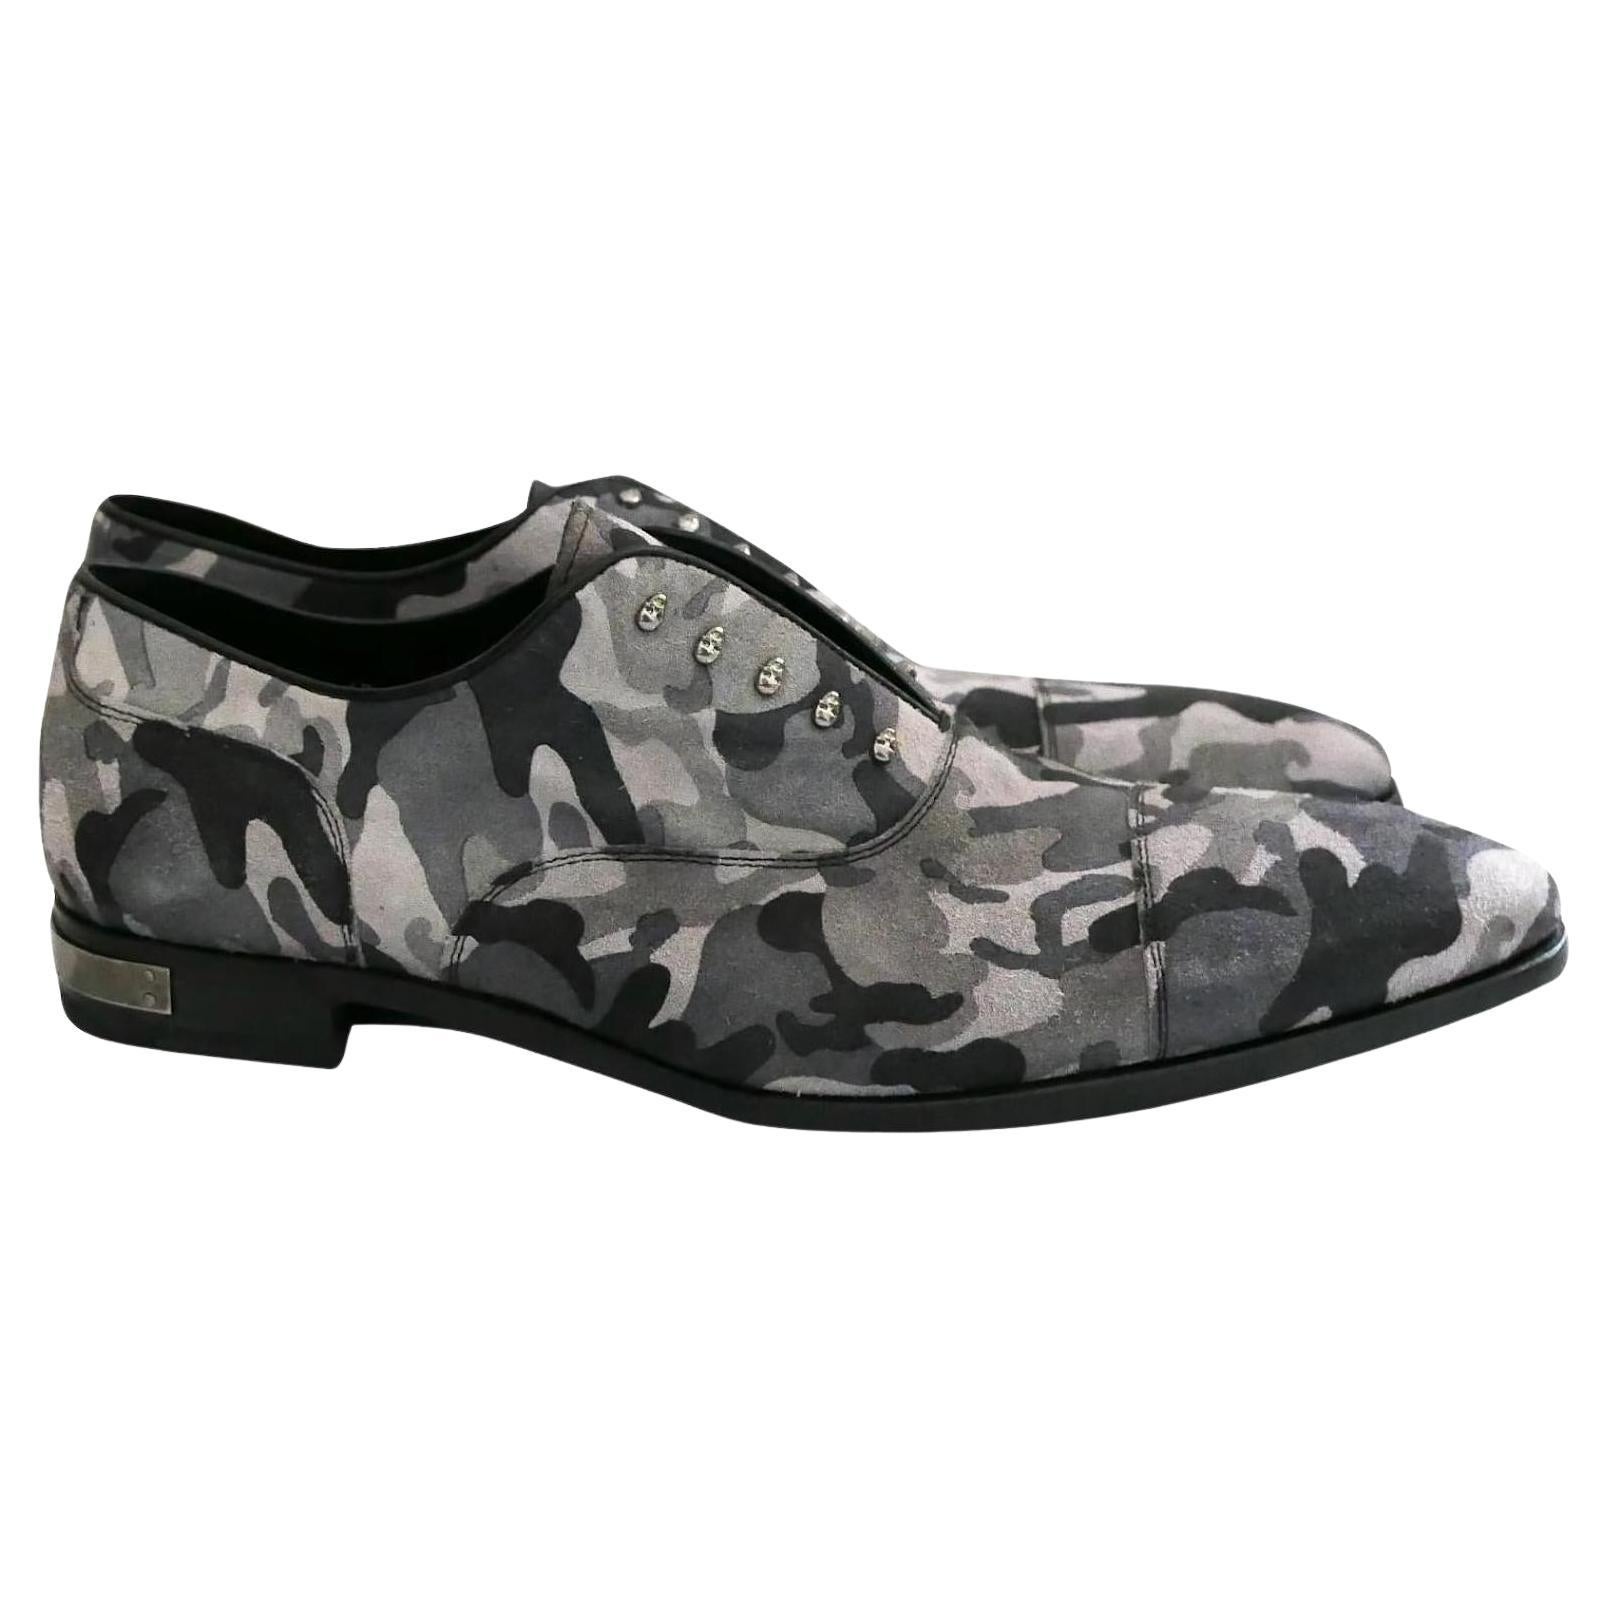 Philipp Plein SS14 Camouflage Skull Class Shoes For Sale